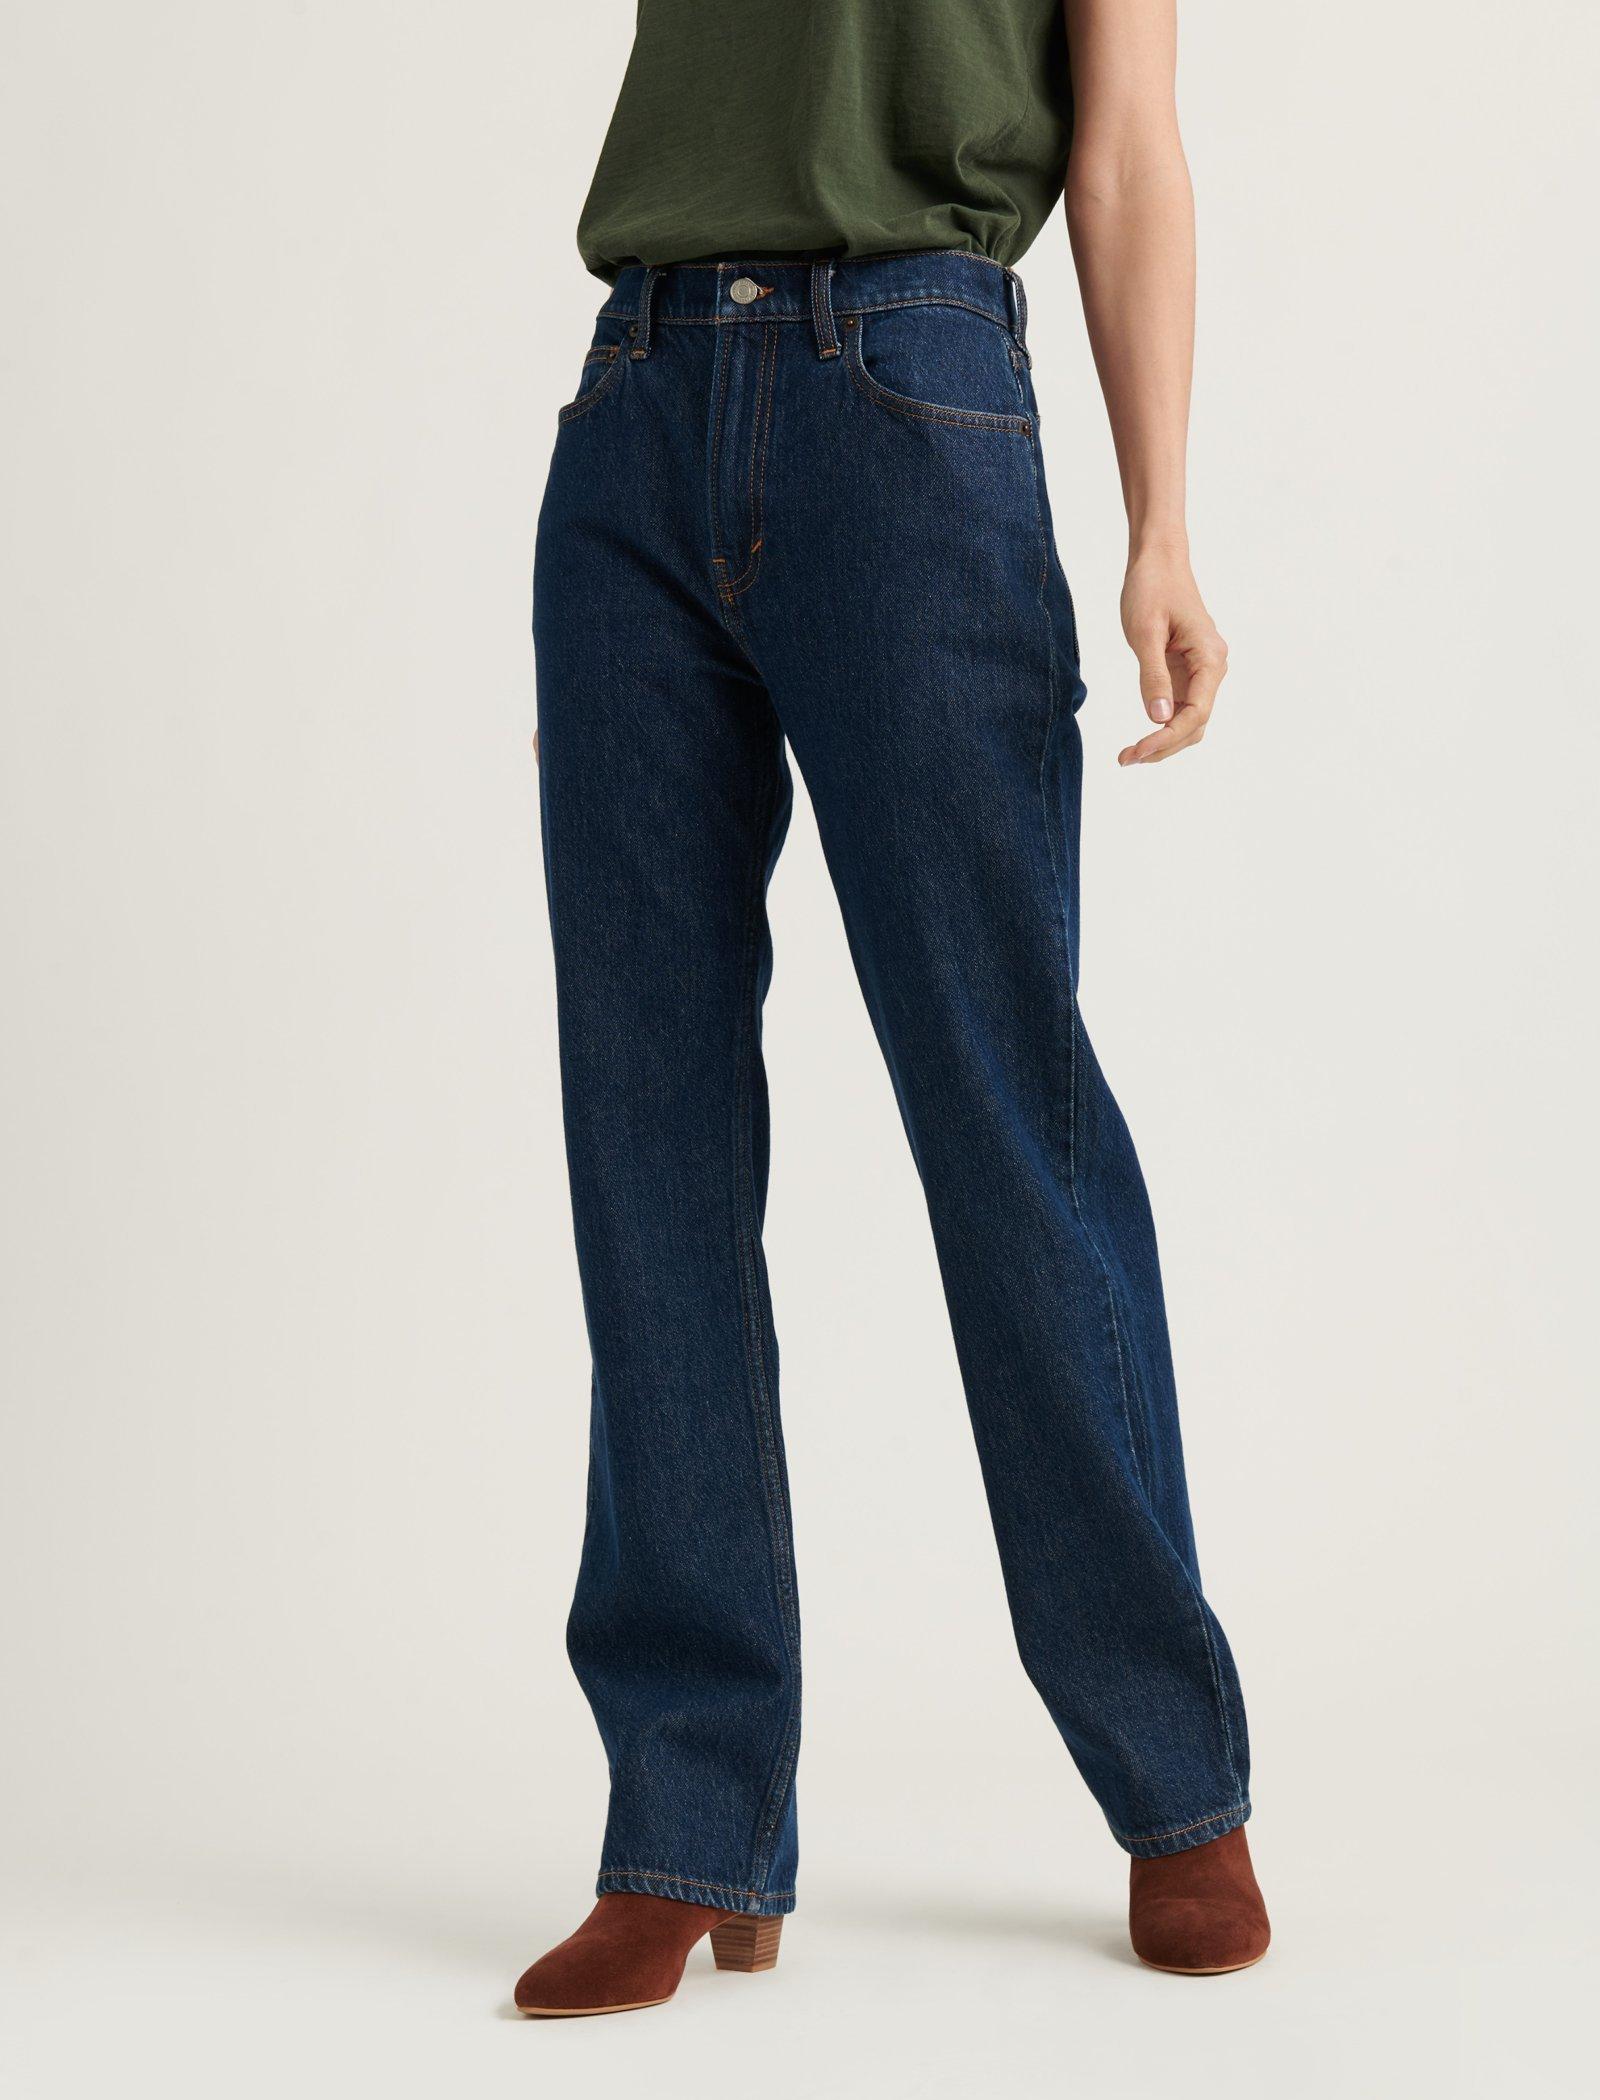 stovepipe jeans